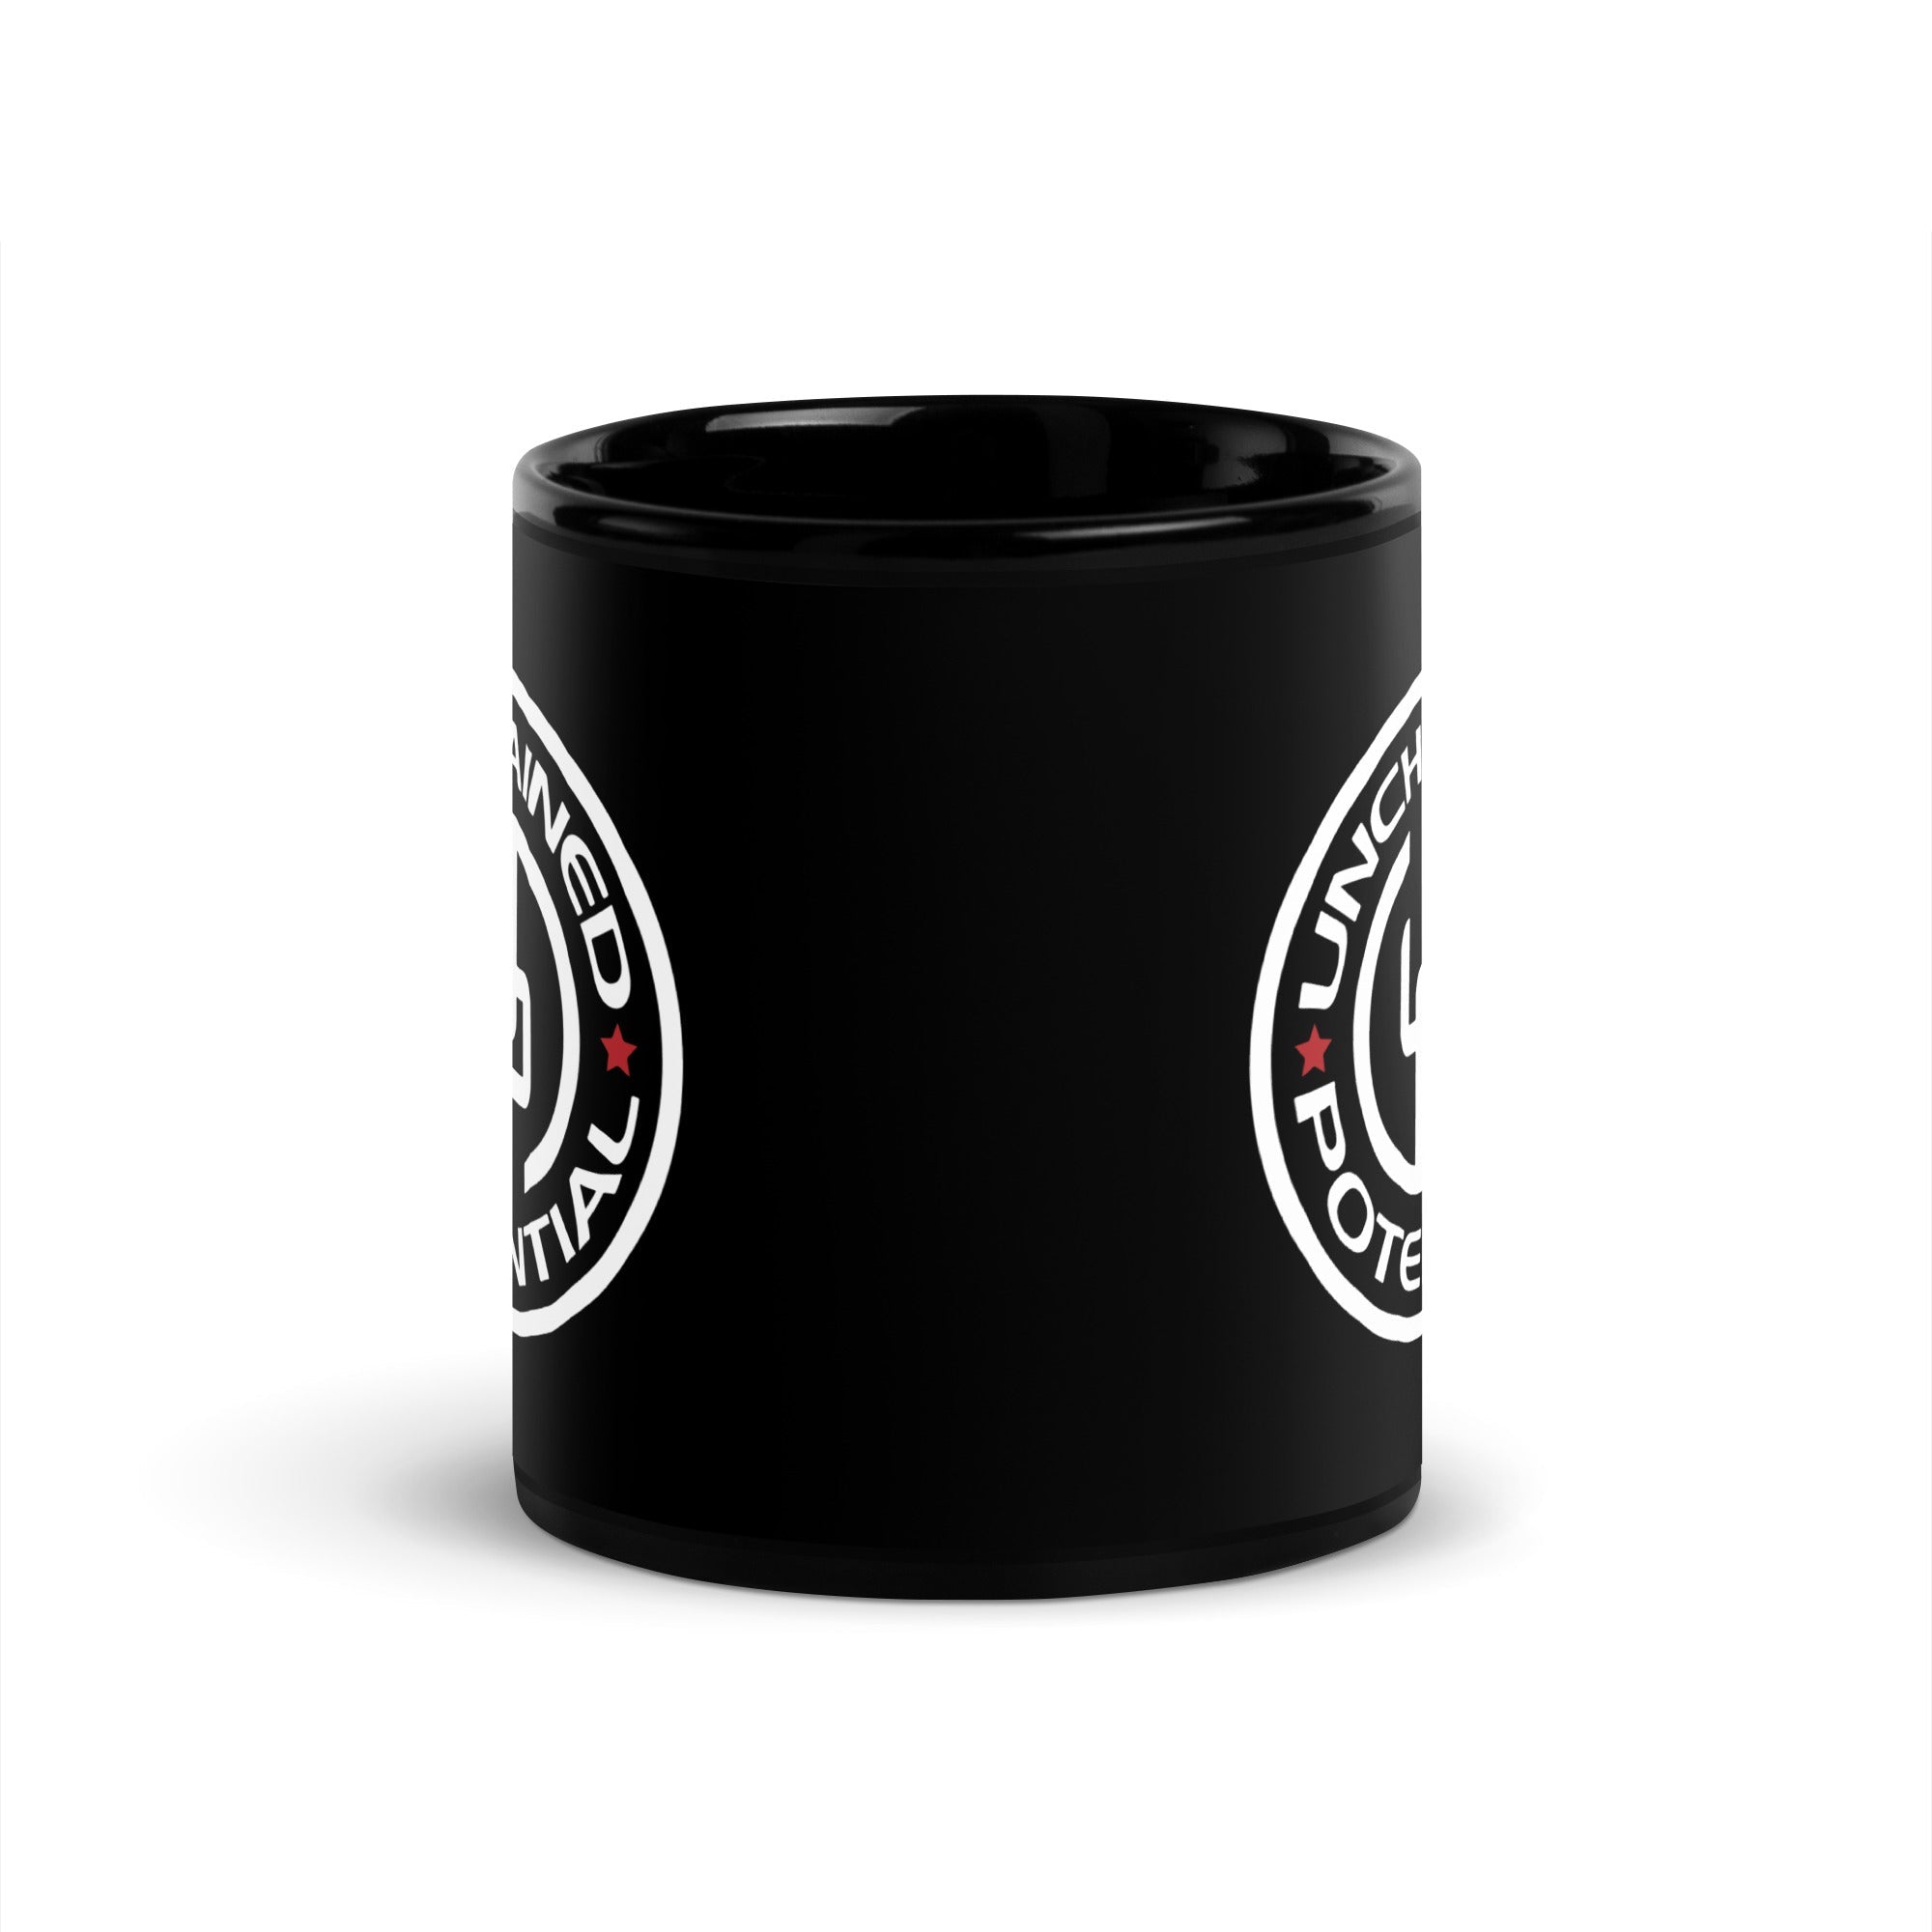 Unchained Potential Black Glossy Mug v2